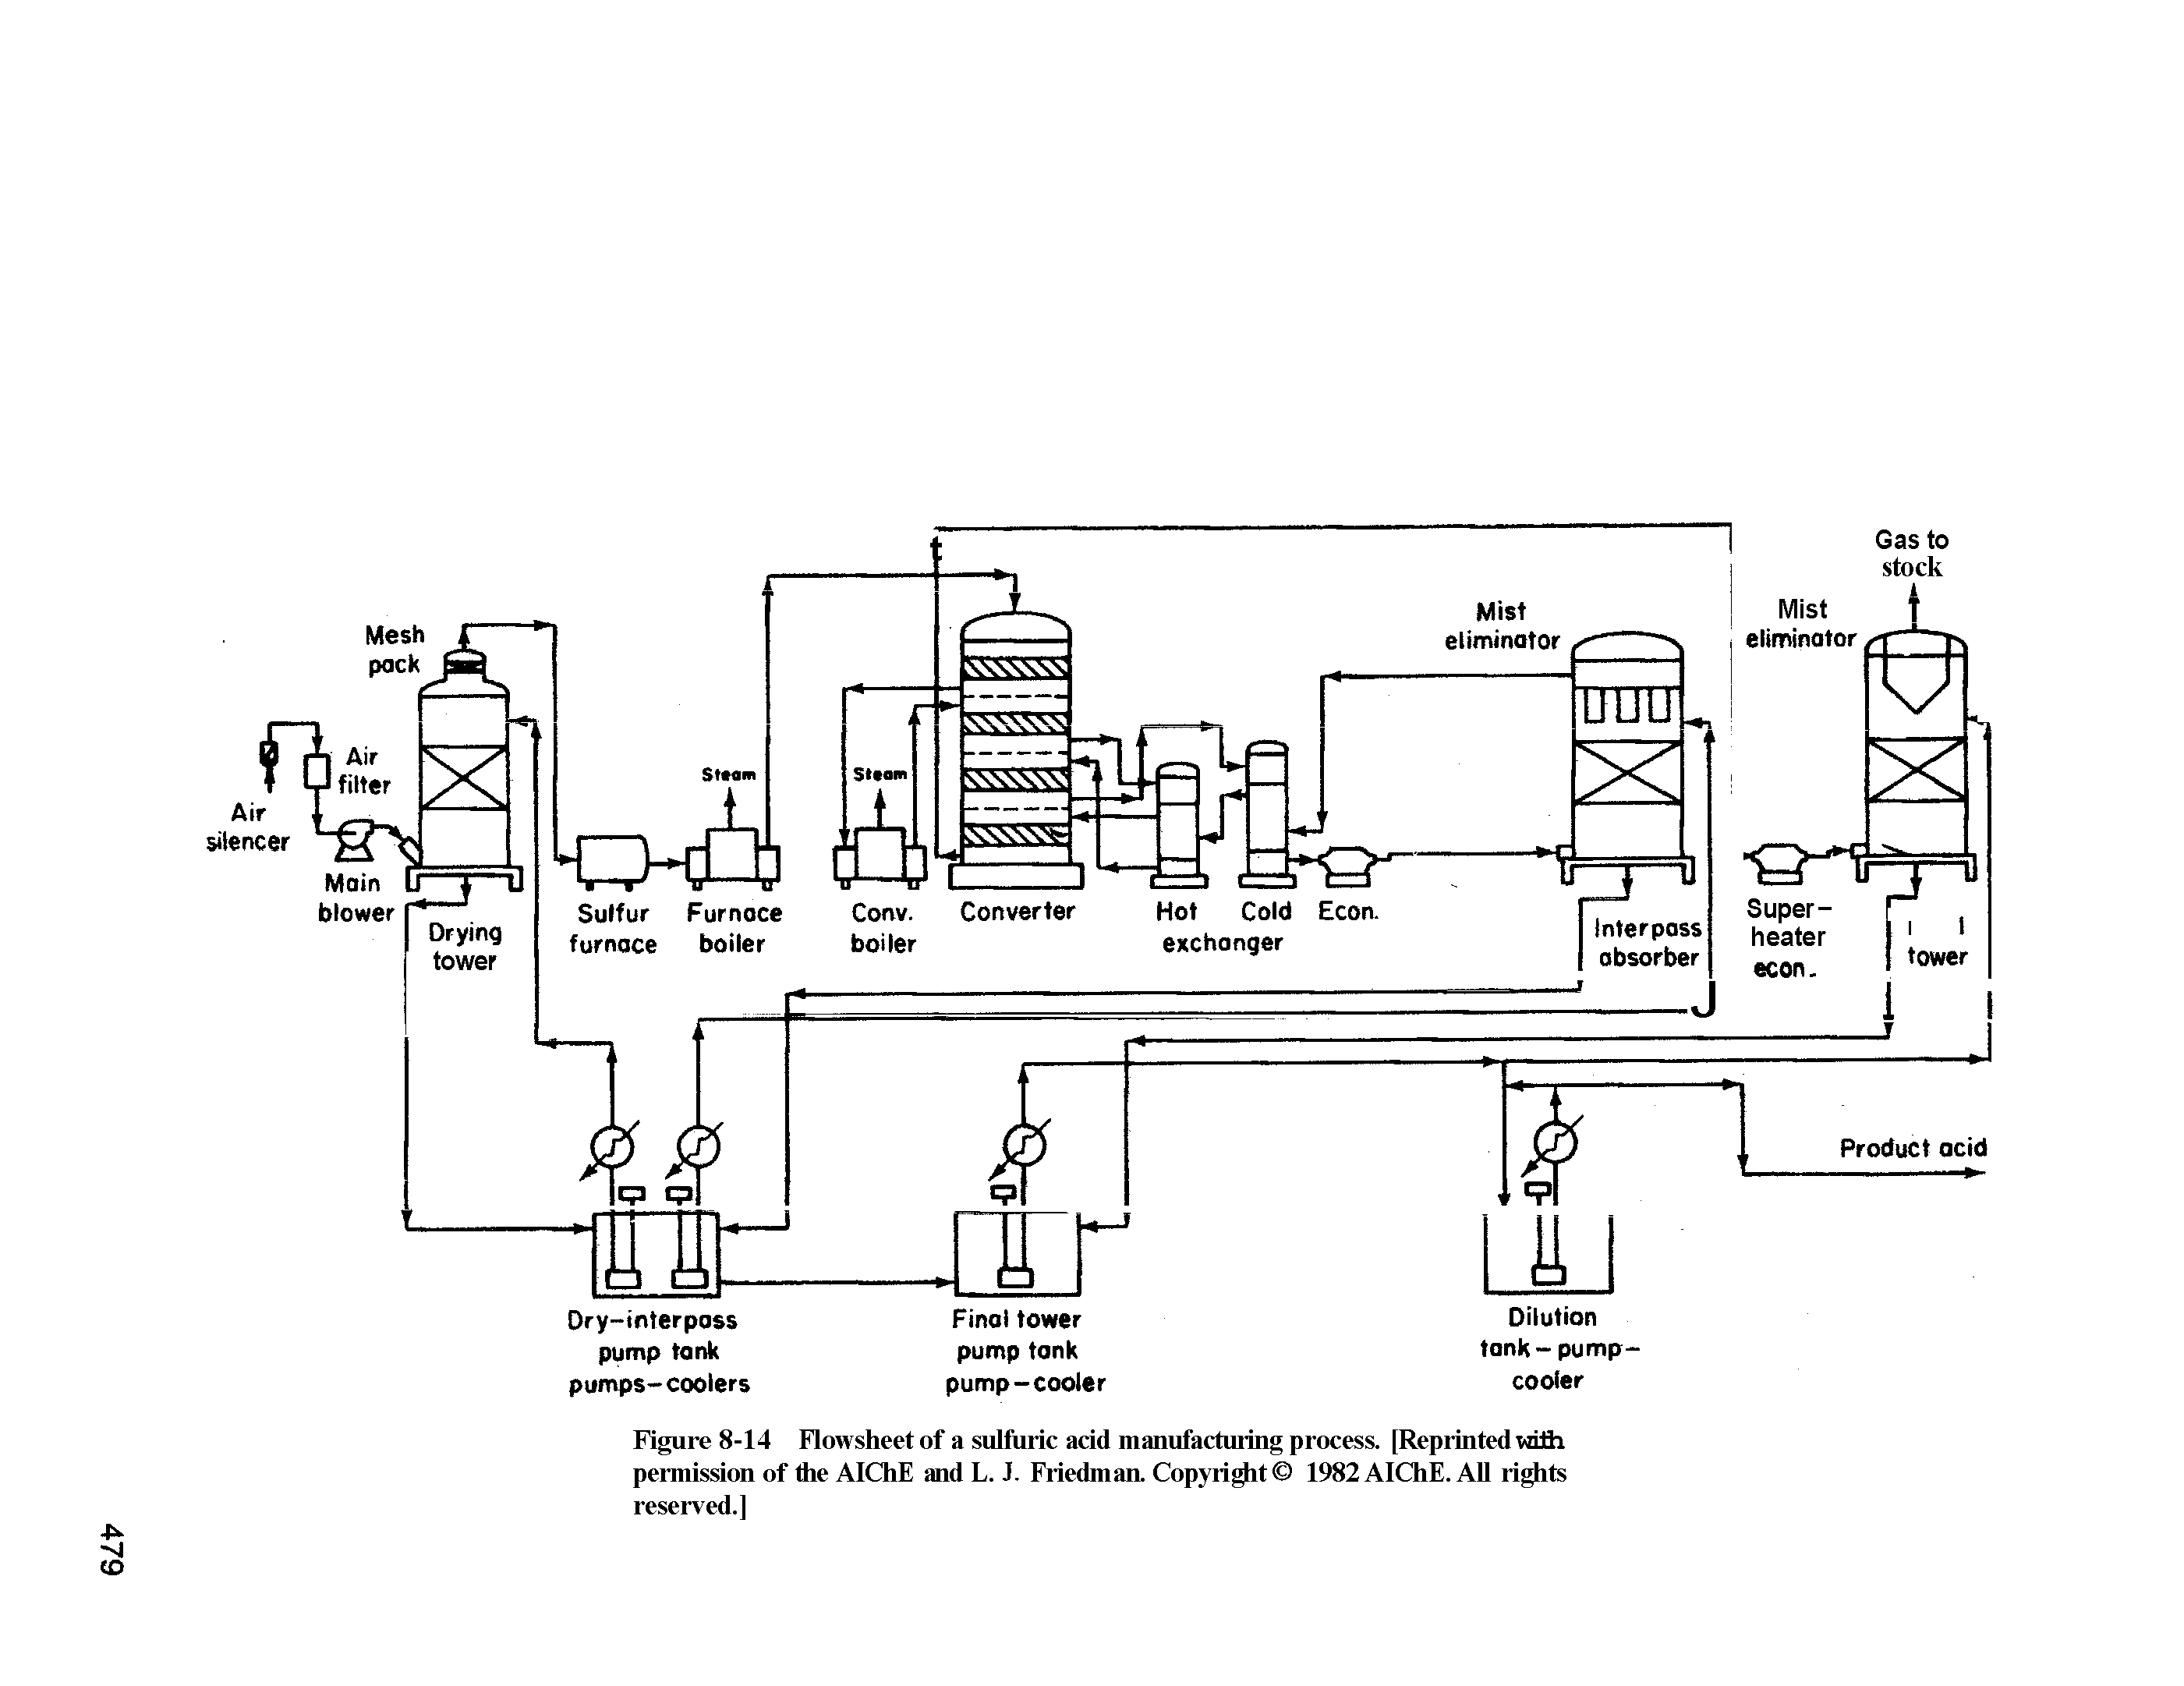 Figure 8-14 Flowsheet of a sulfuric acid manufacturing process. [Reprinted wilii permission of the AIQiE and L. J. Friedman. Copyright 1982 AIChE. All rights reserved.]...